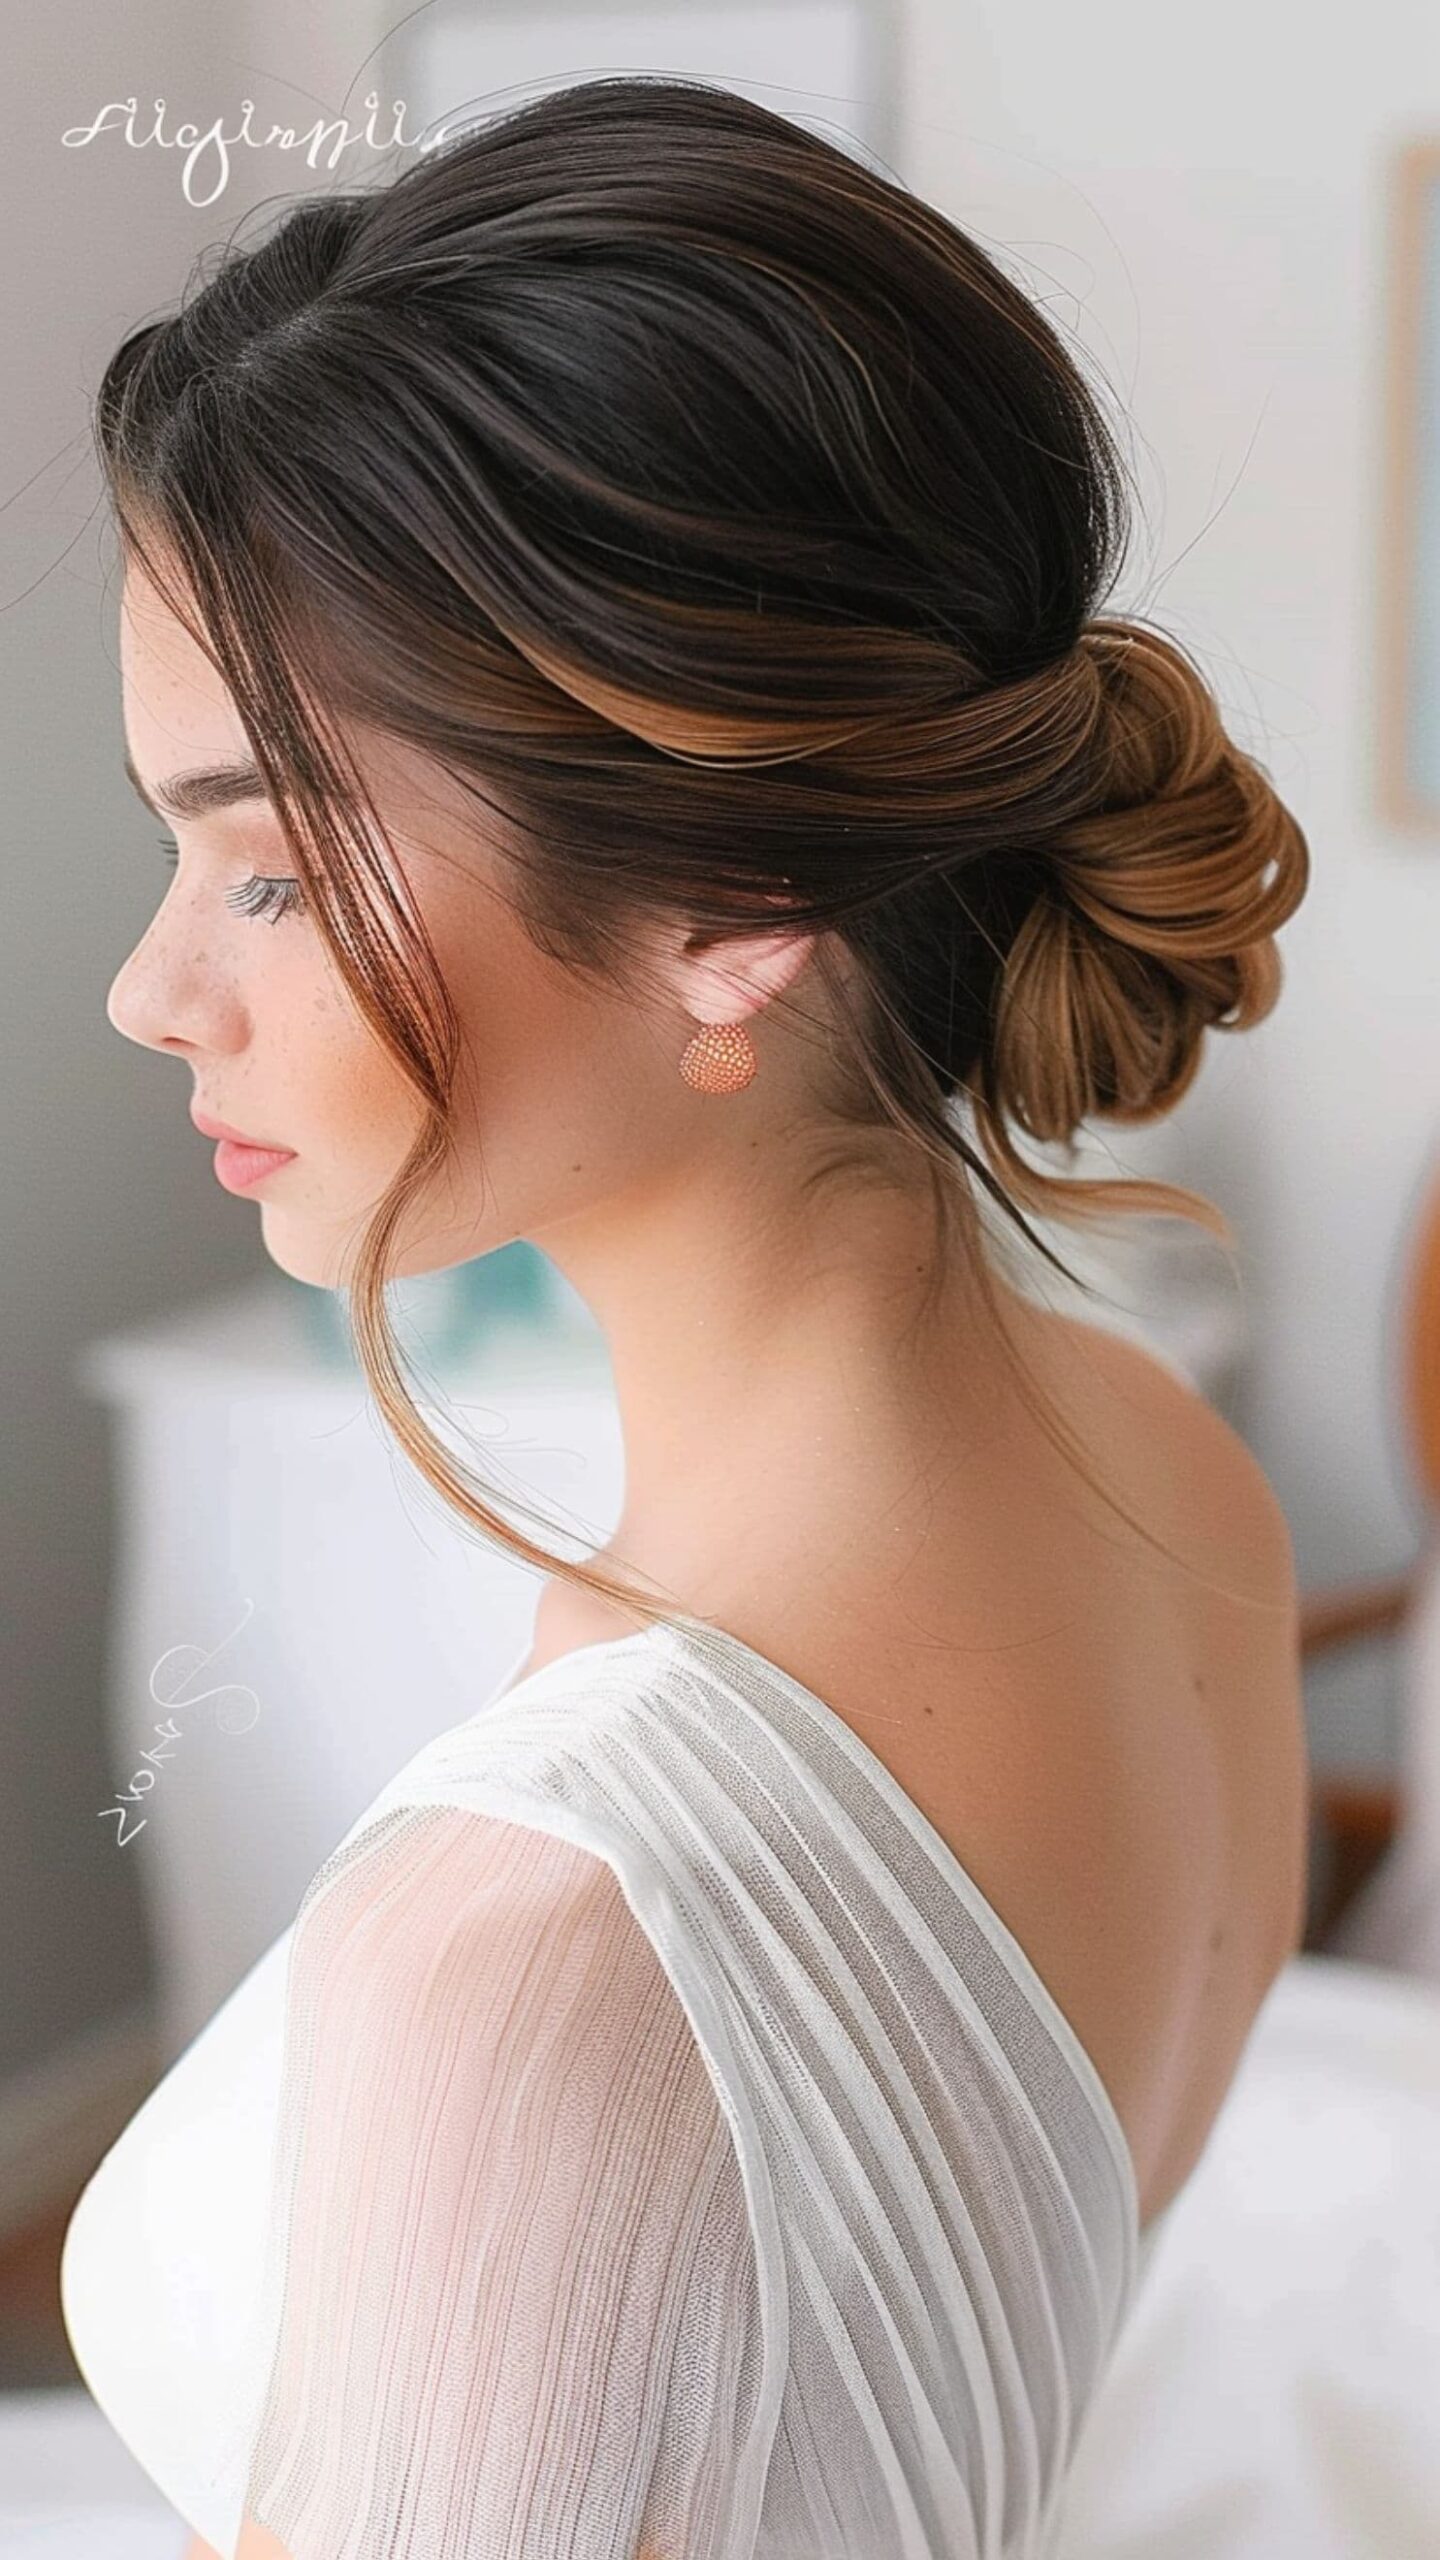 A woman modelling a textured low chignon hairstyle.